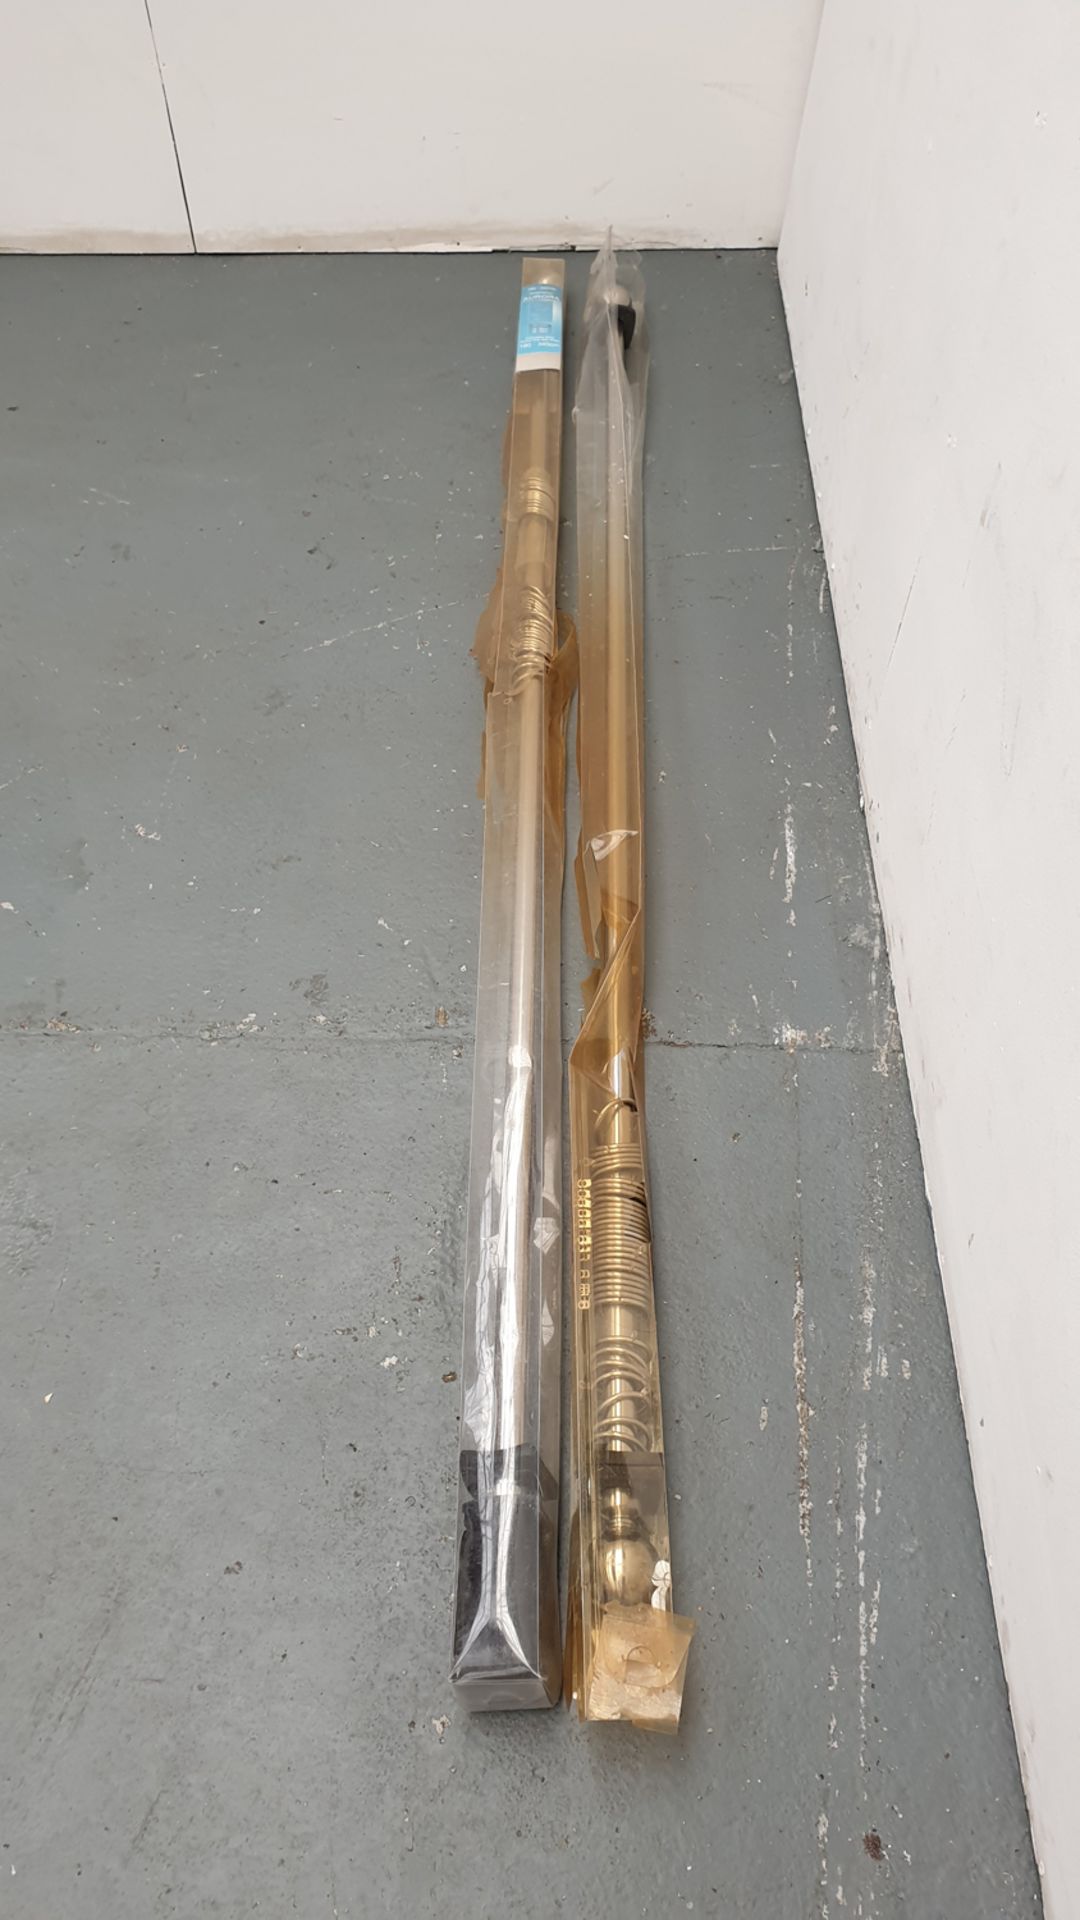 2 x Curtain Poles. - Image 2 of 3